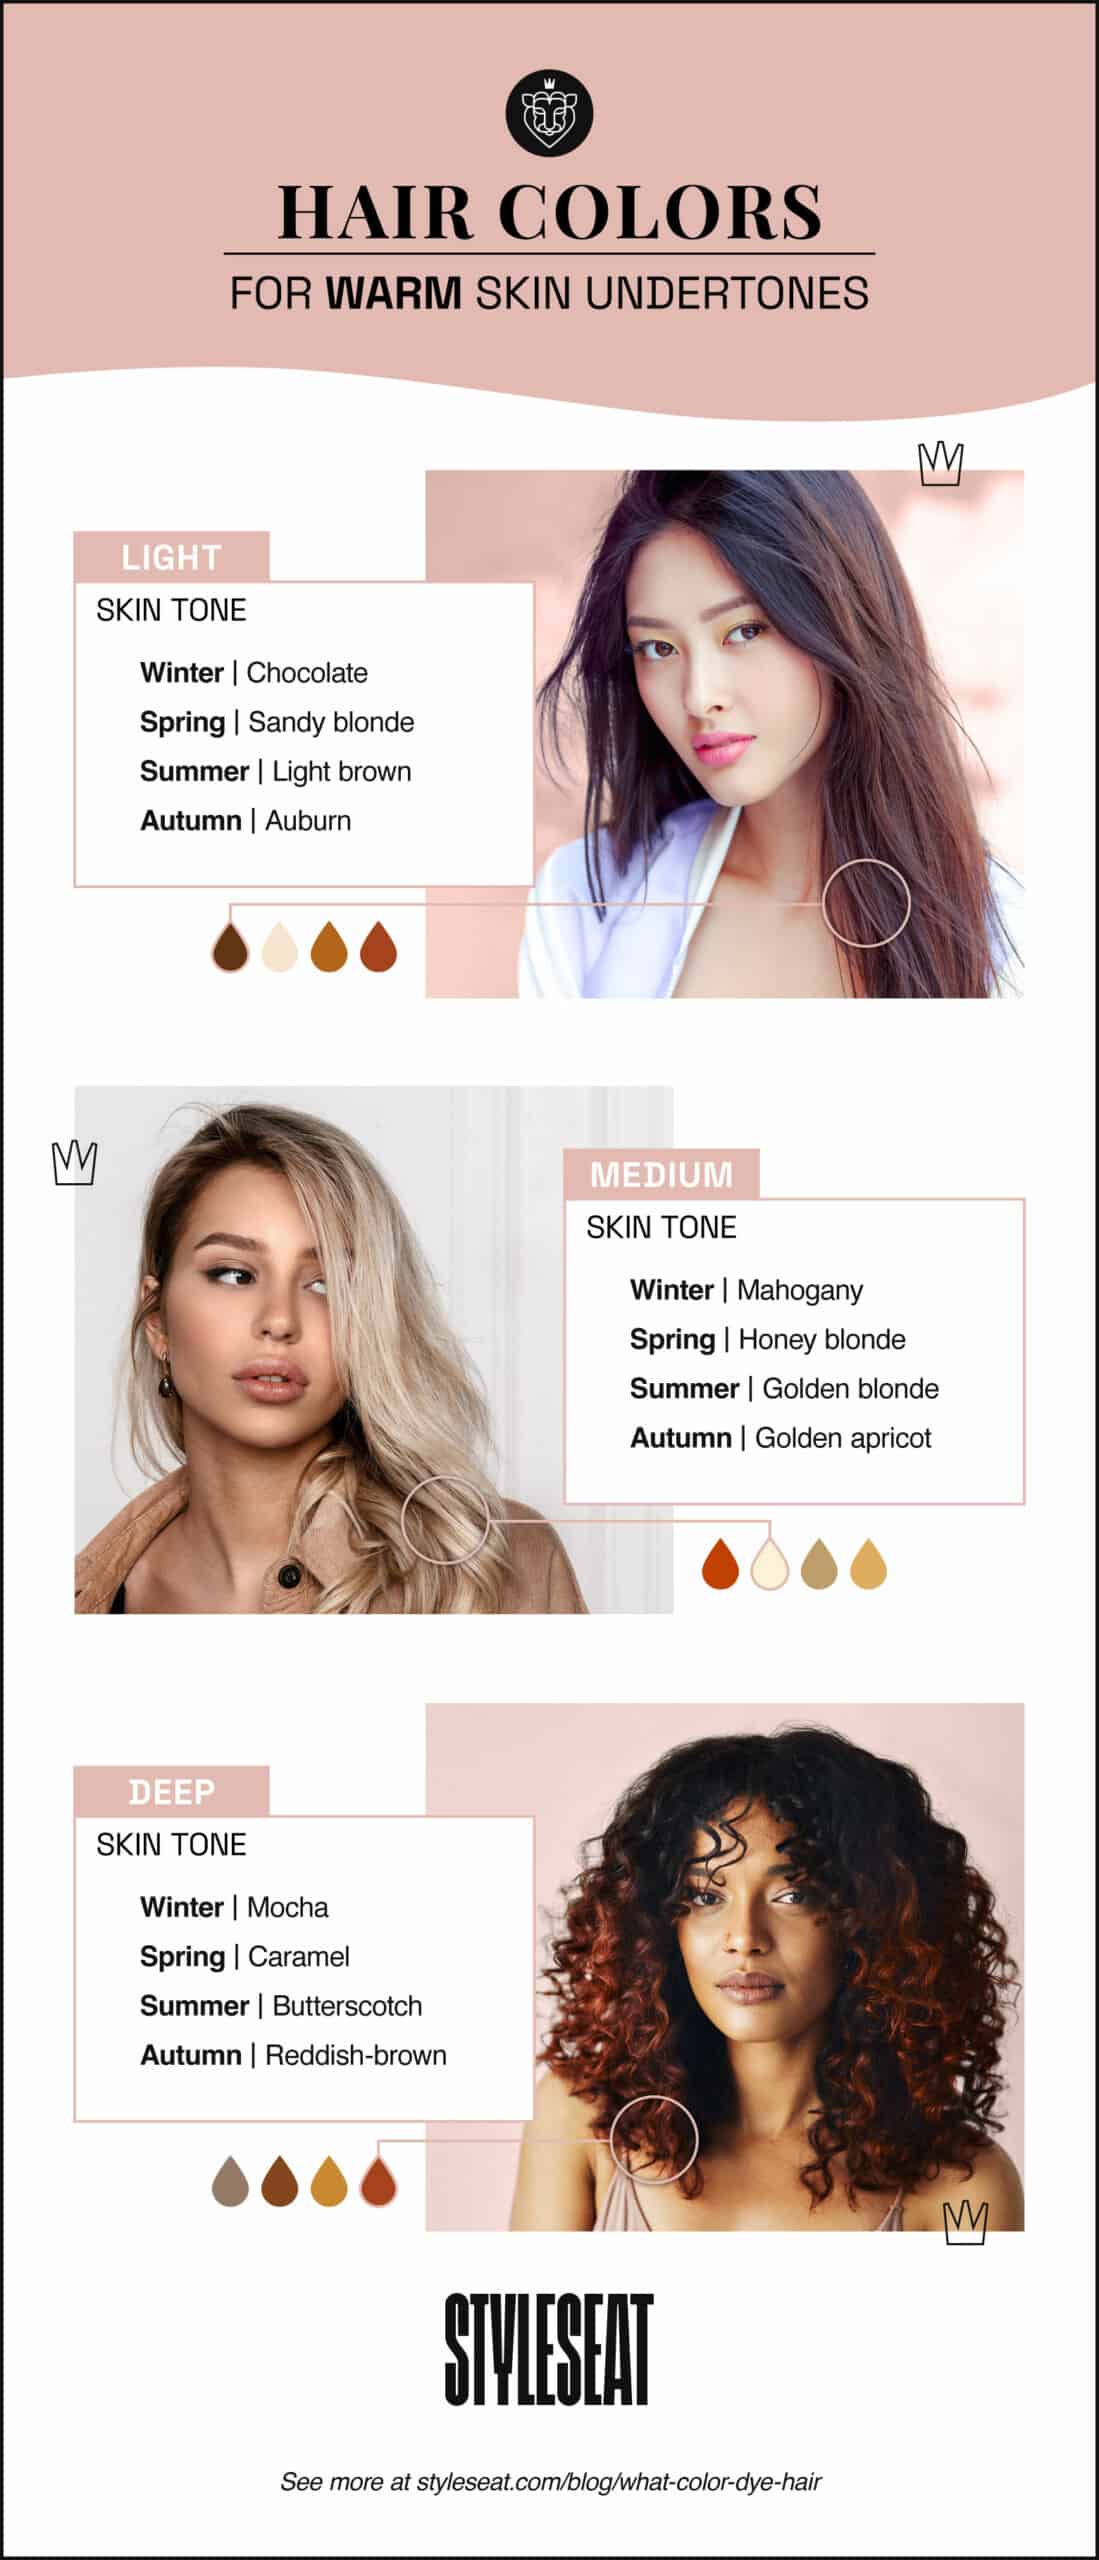 mood board showing photo examples of hair color for warm skin tones